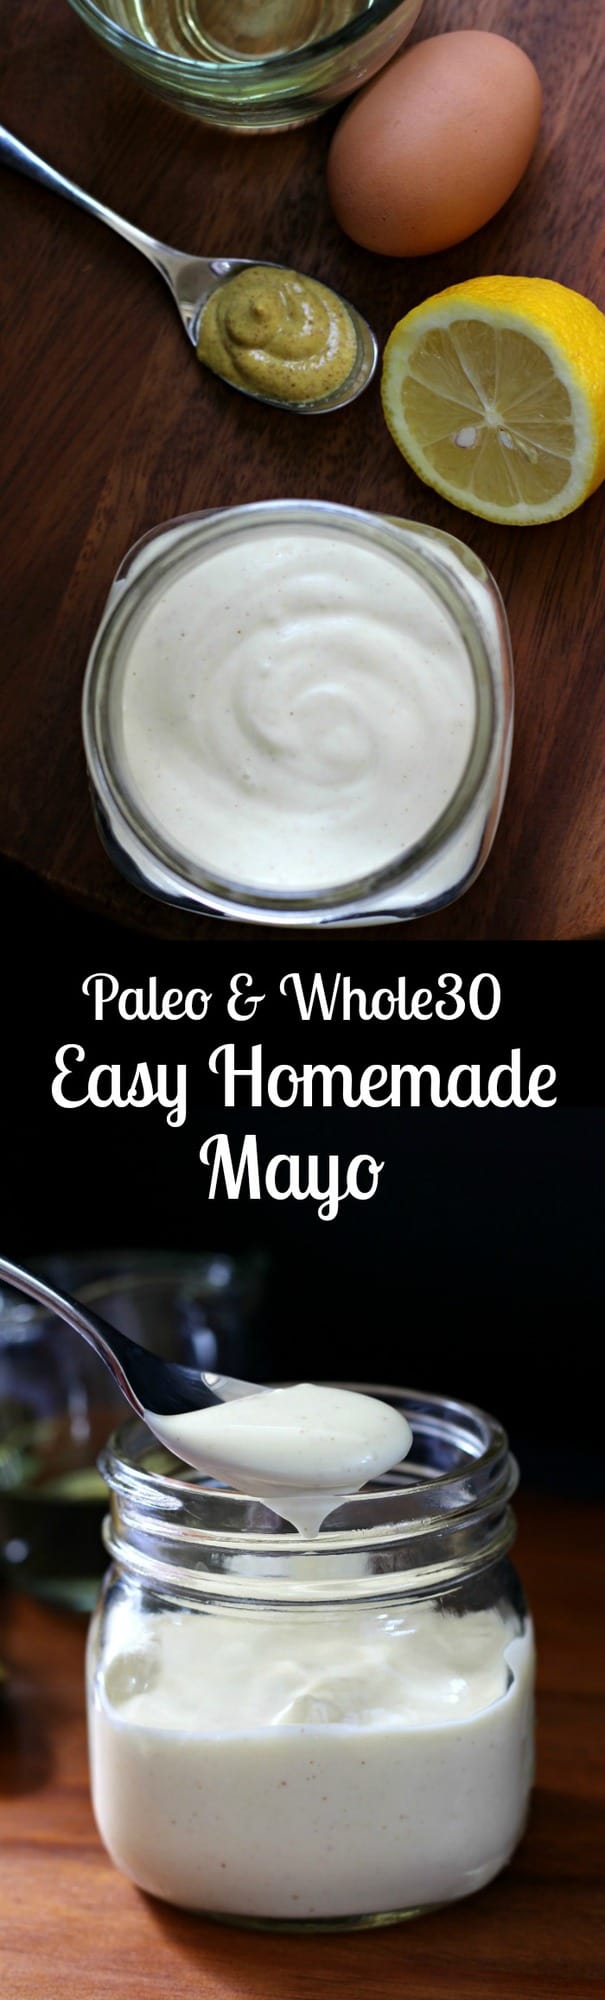 Paleo & Whole30 friendly easy homemade mayo recipe using 4 ingredients and an immersion blender. Use alone or as a base for other dips, dressings, and sauces!